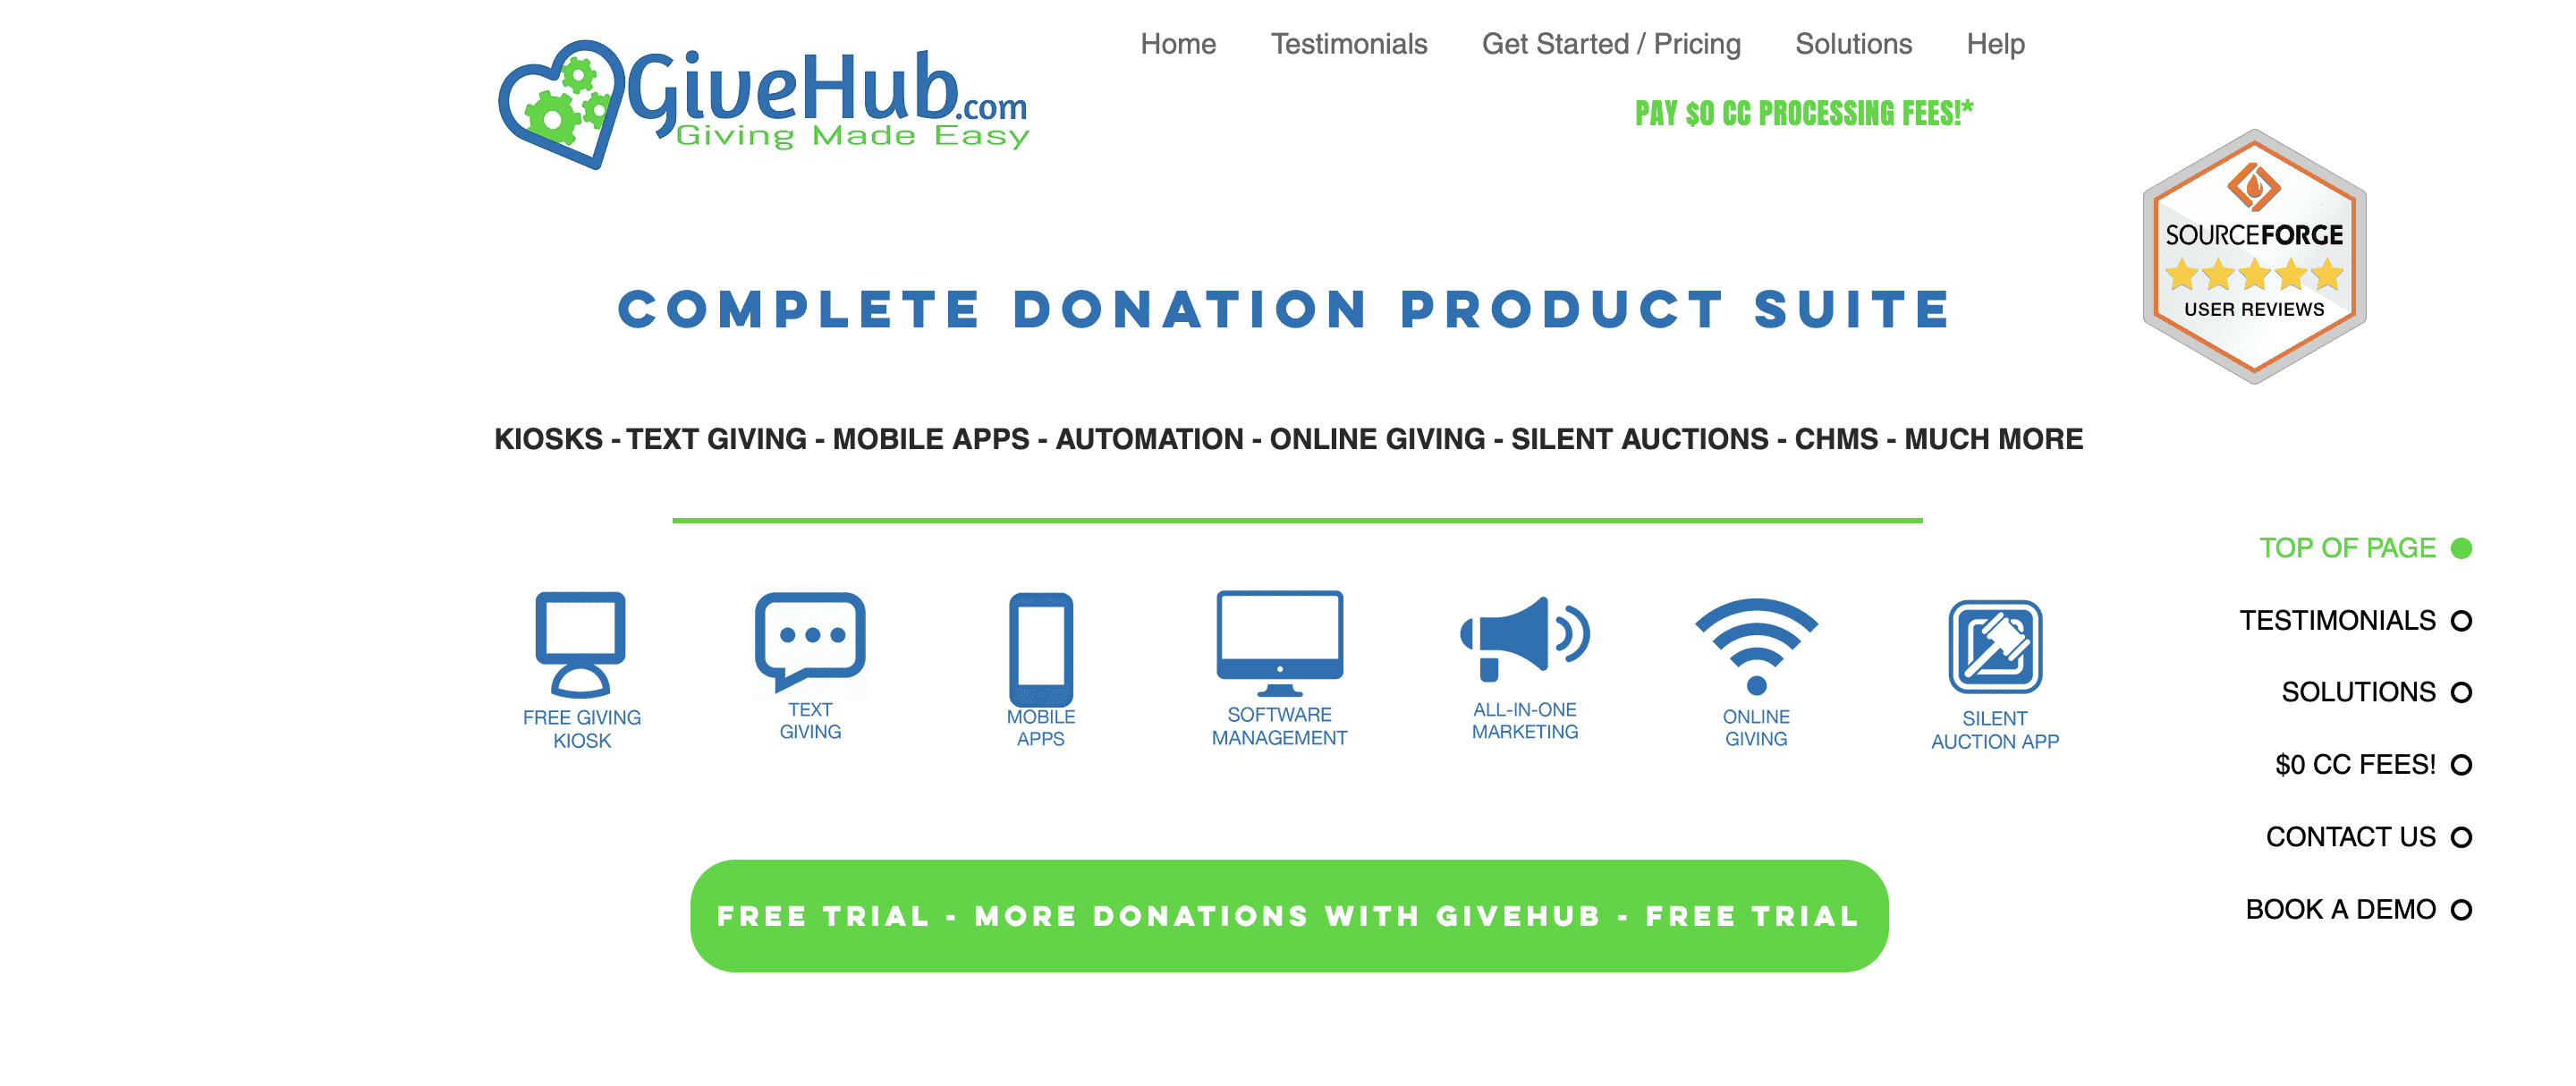 Learn more about <a href="/givehub-vs-raklet">GIVEHUB</a>